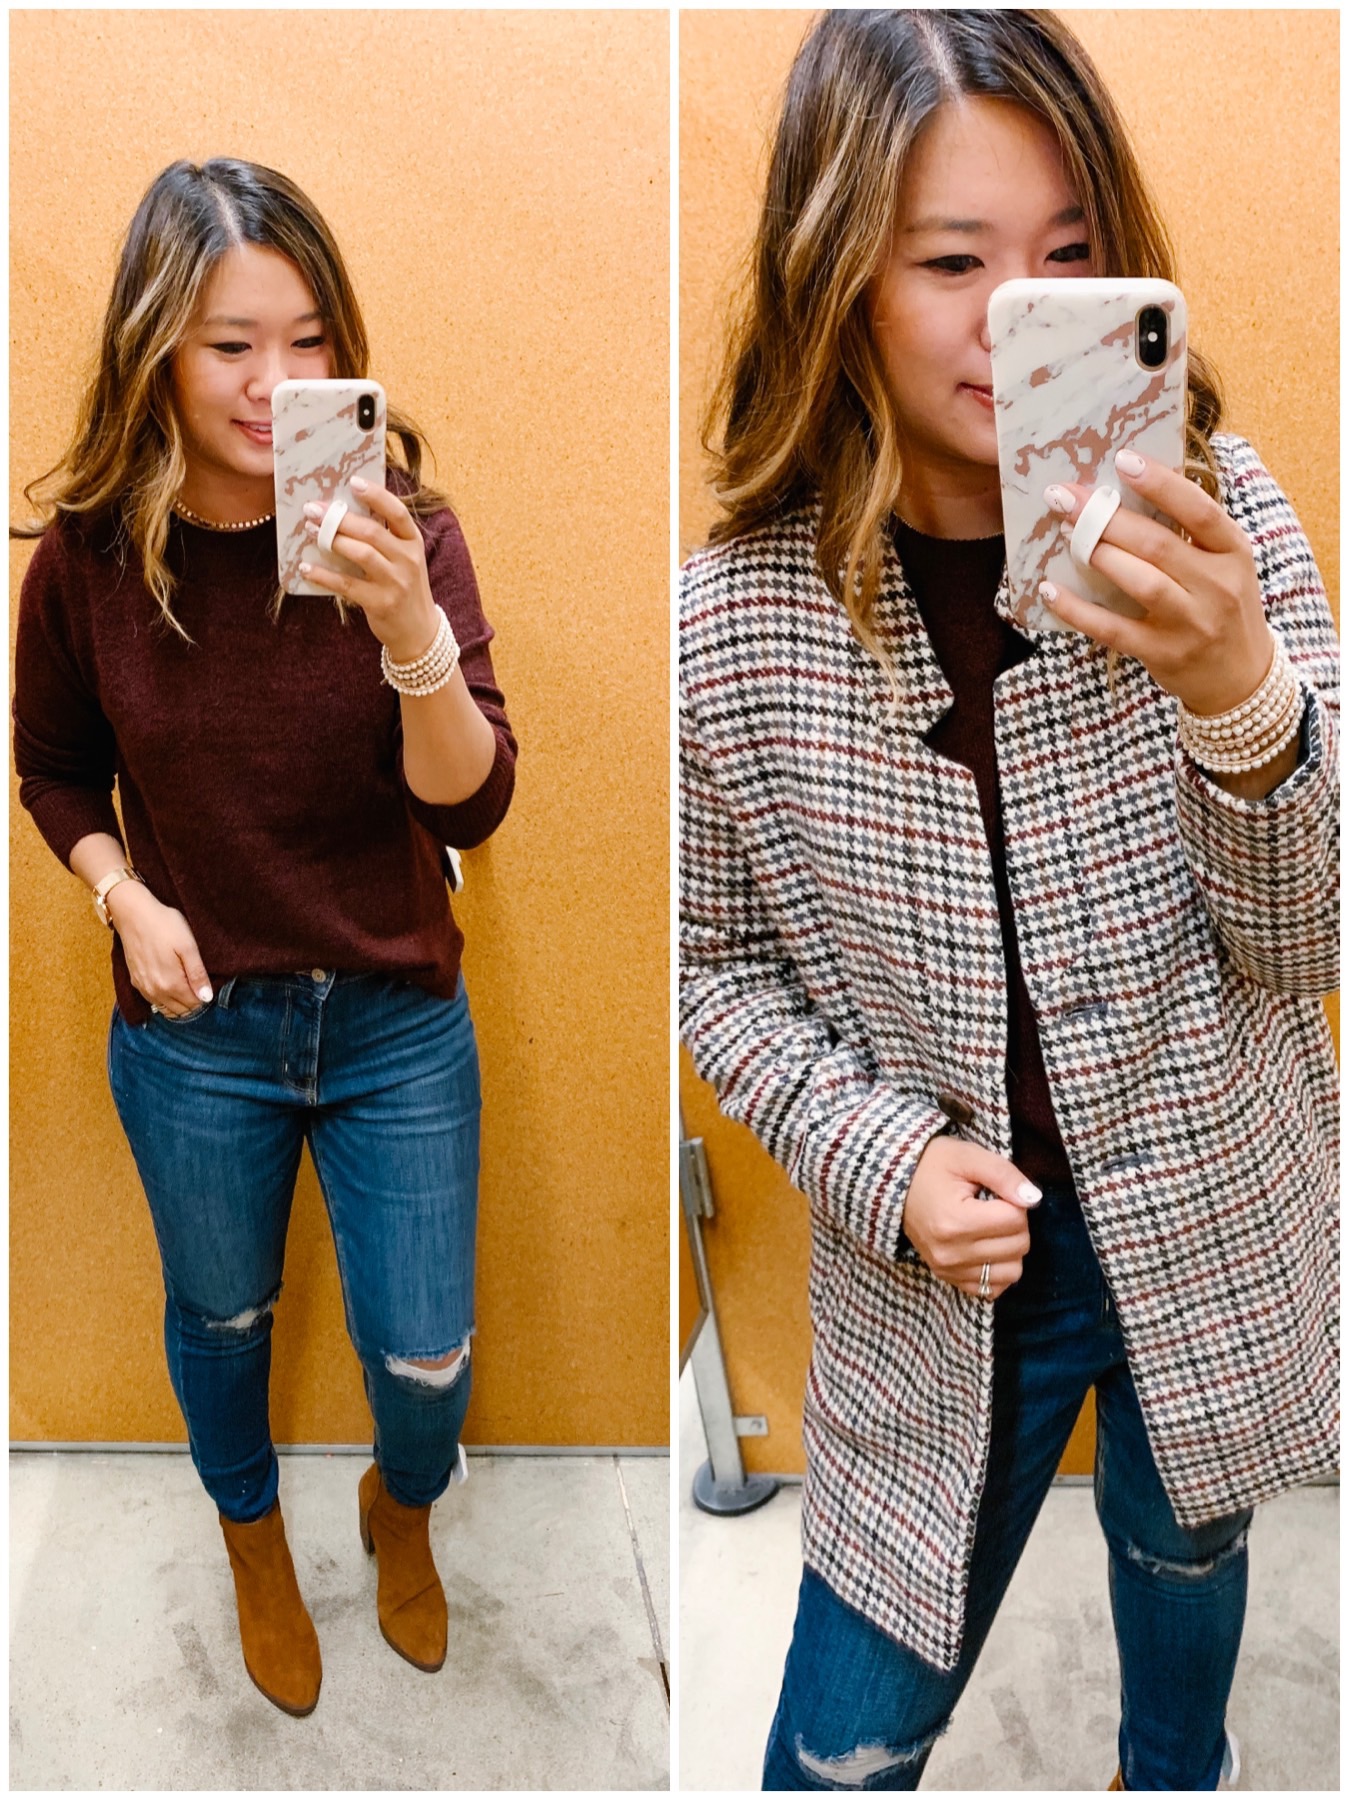 Old Navy Dressing Room Try On – August 2019 (Part 2)